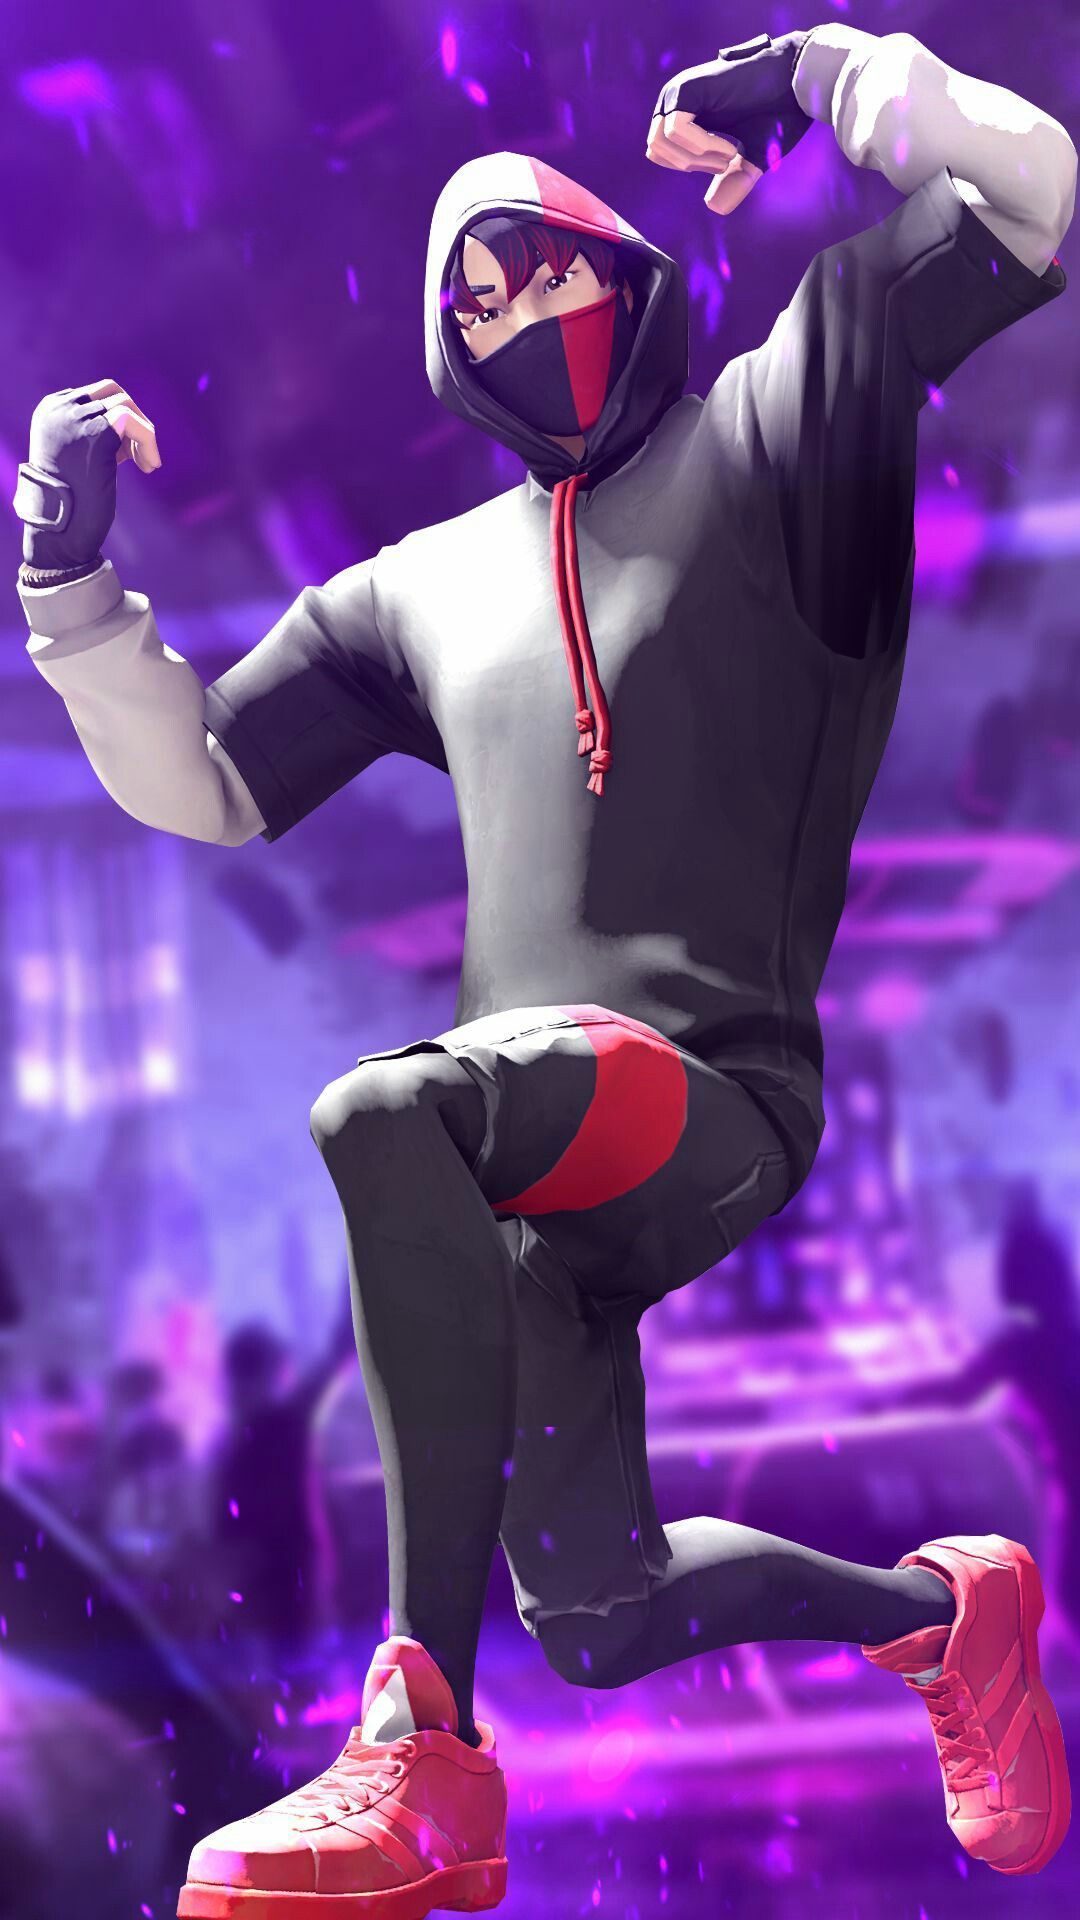 Ikonik Whoo! Thank You Epic Fortnite Love This Skin Everytime I See The Skin I H In 2020. Best Gaming Wallpaper, Gamer Pics, Gaming Wallpaper